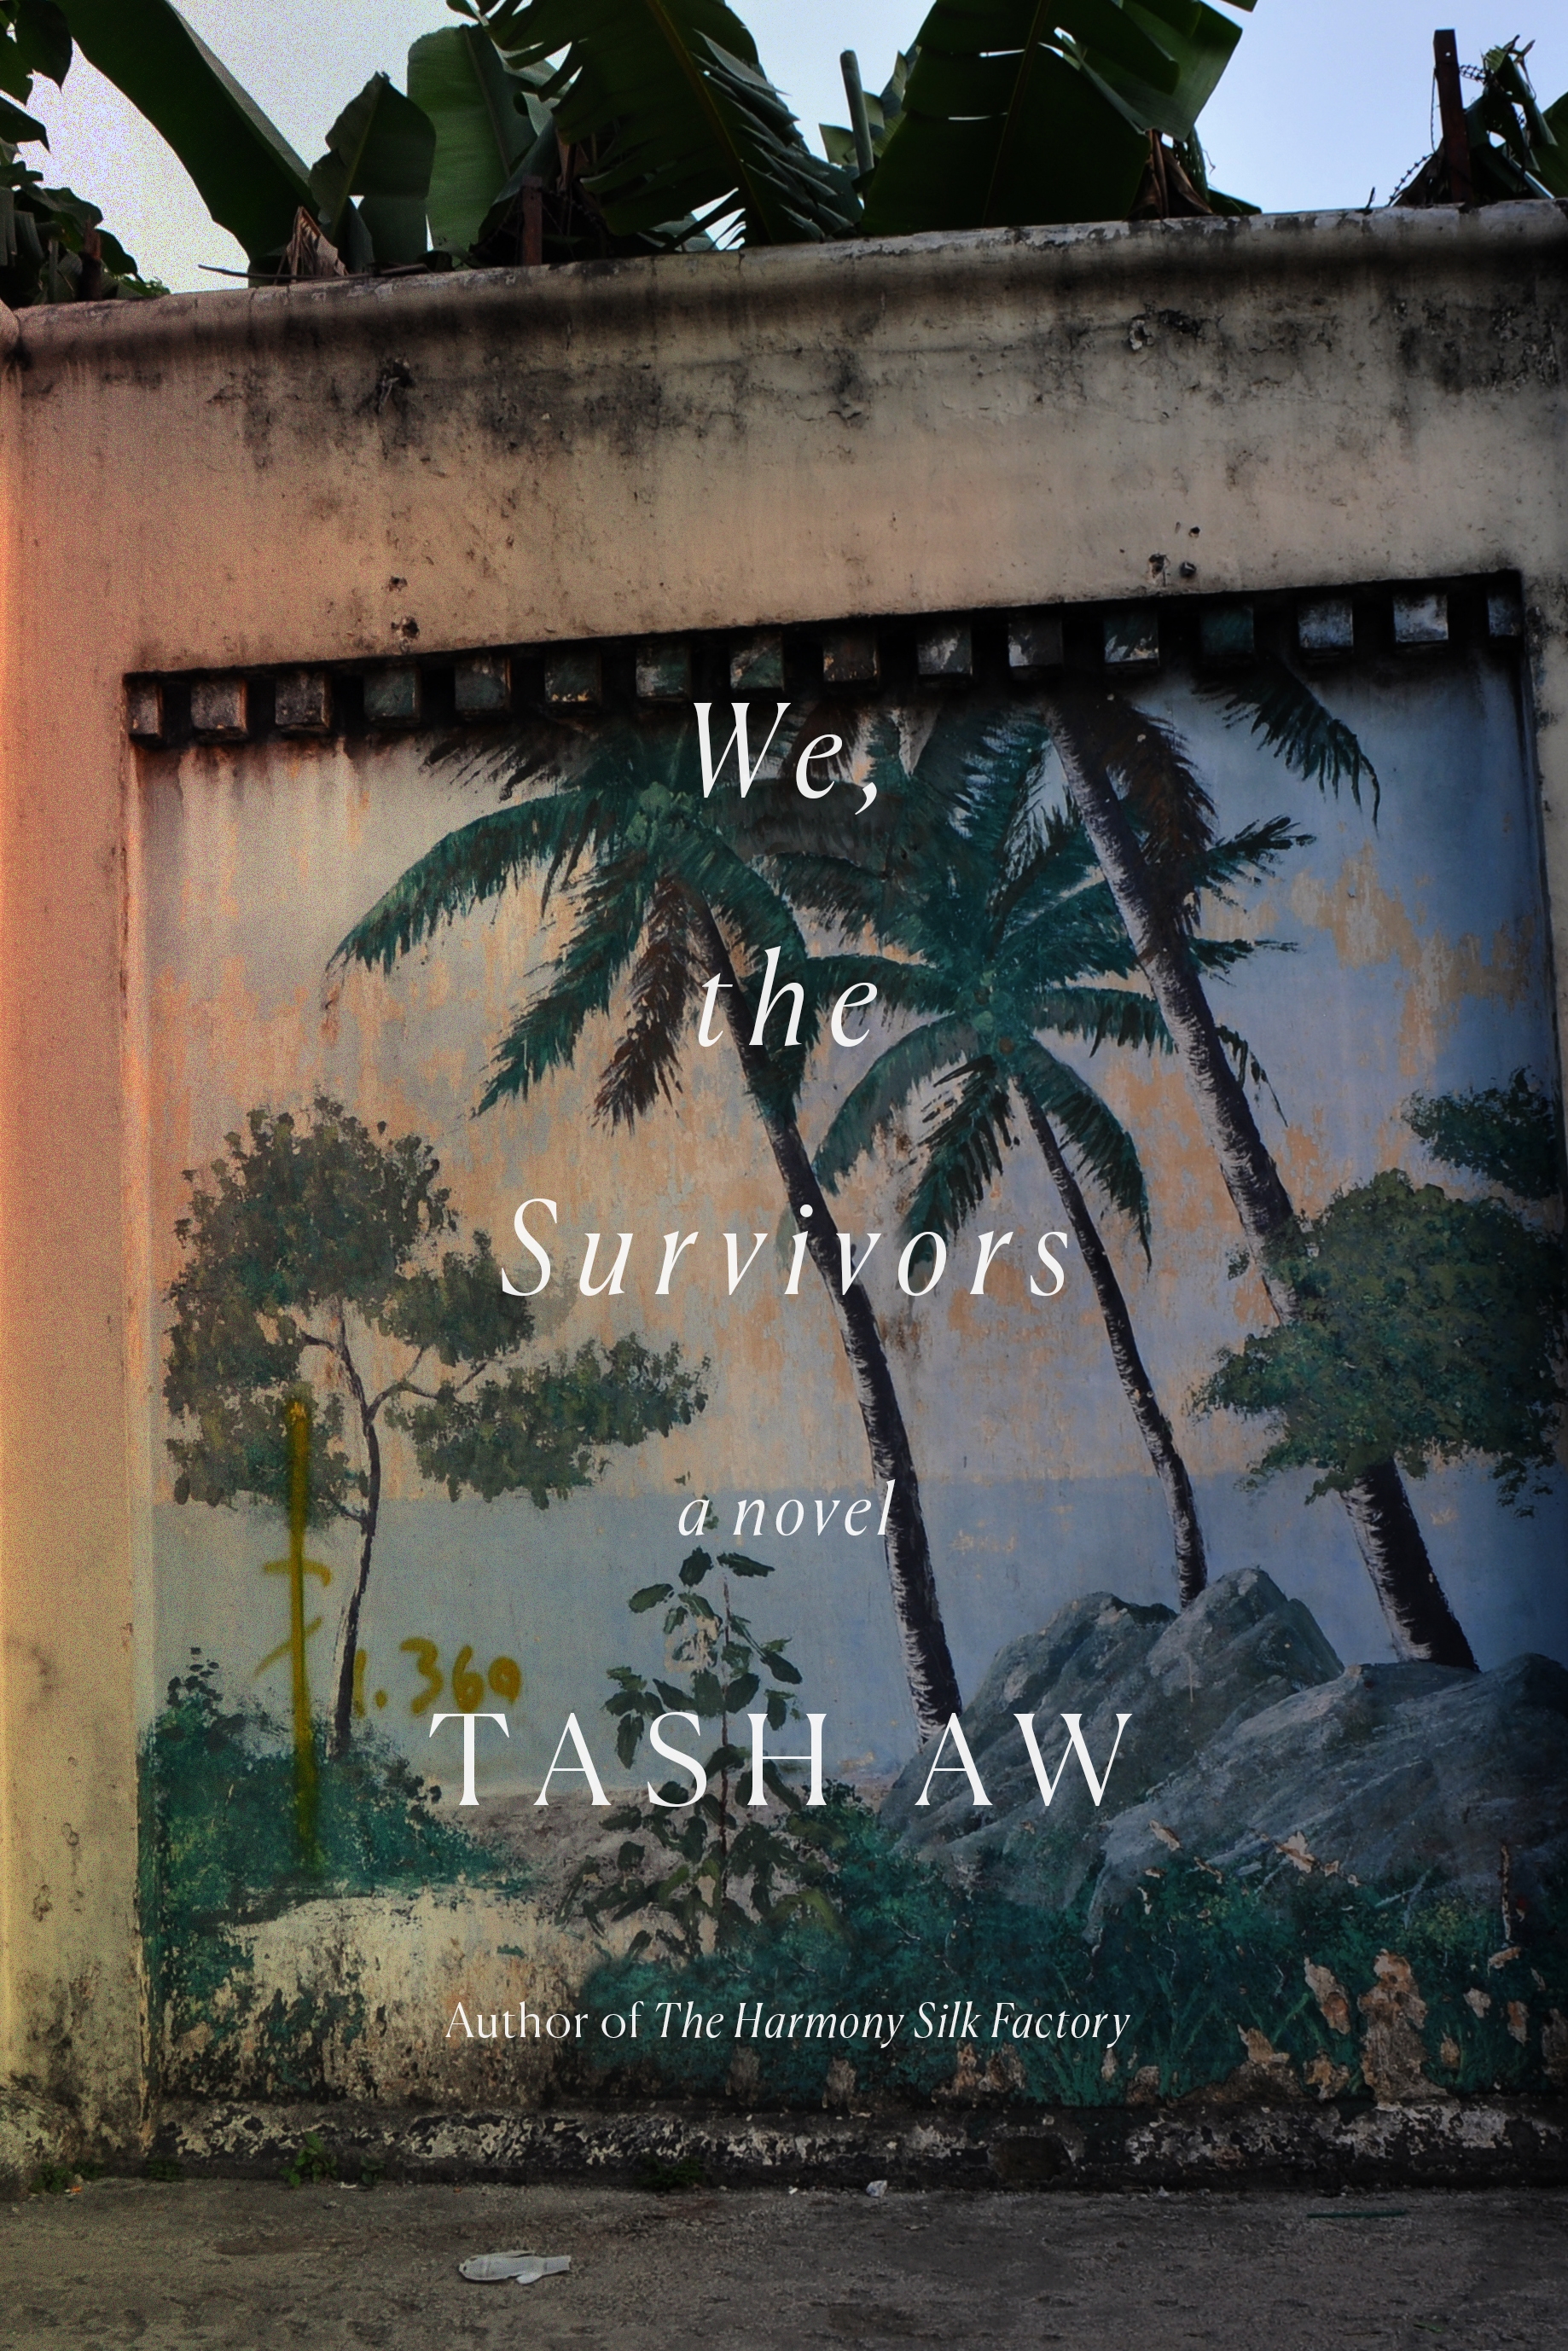 Book “We, the Survivors” by Tash Aw — September 3, 2019